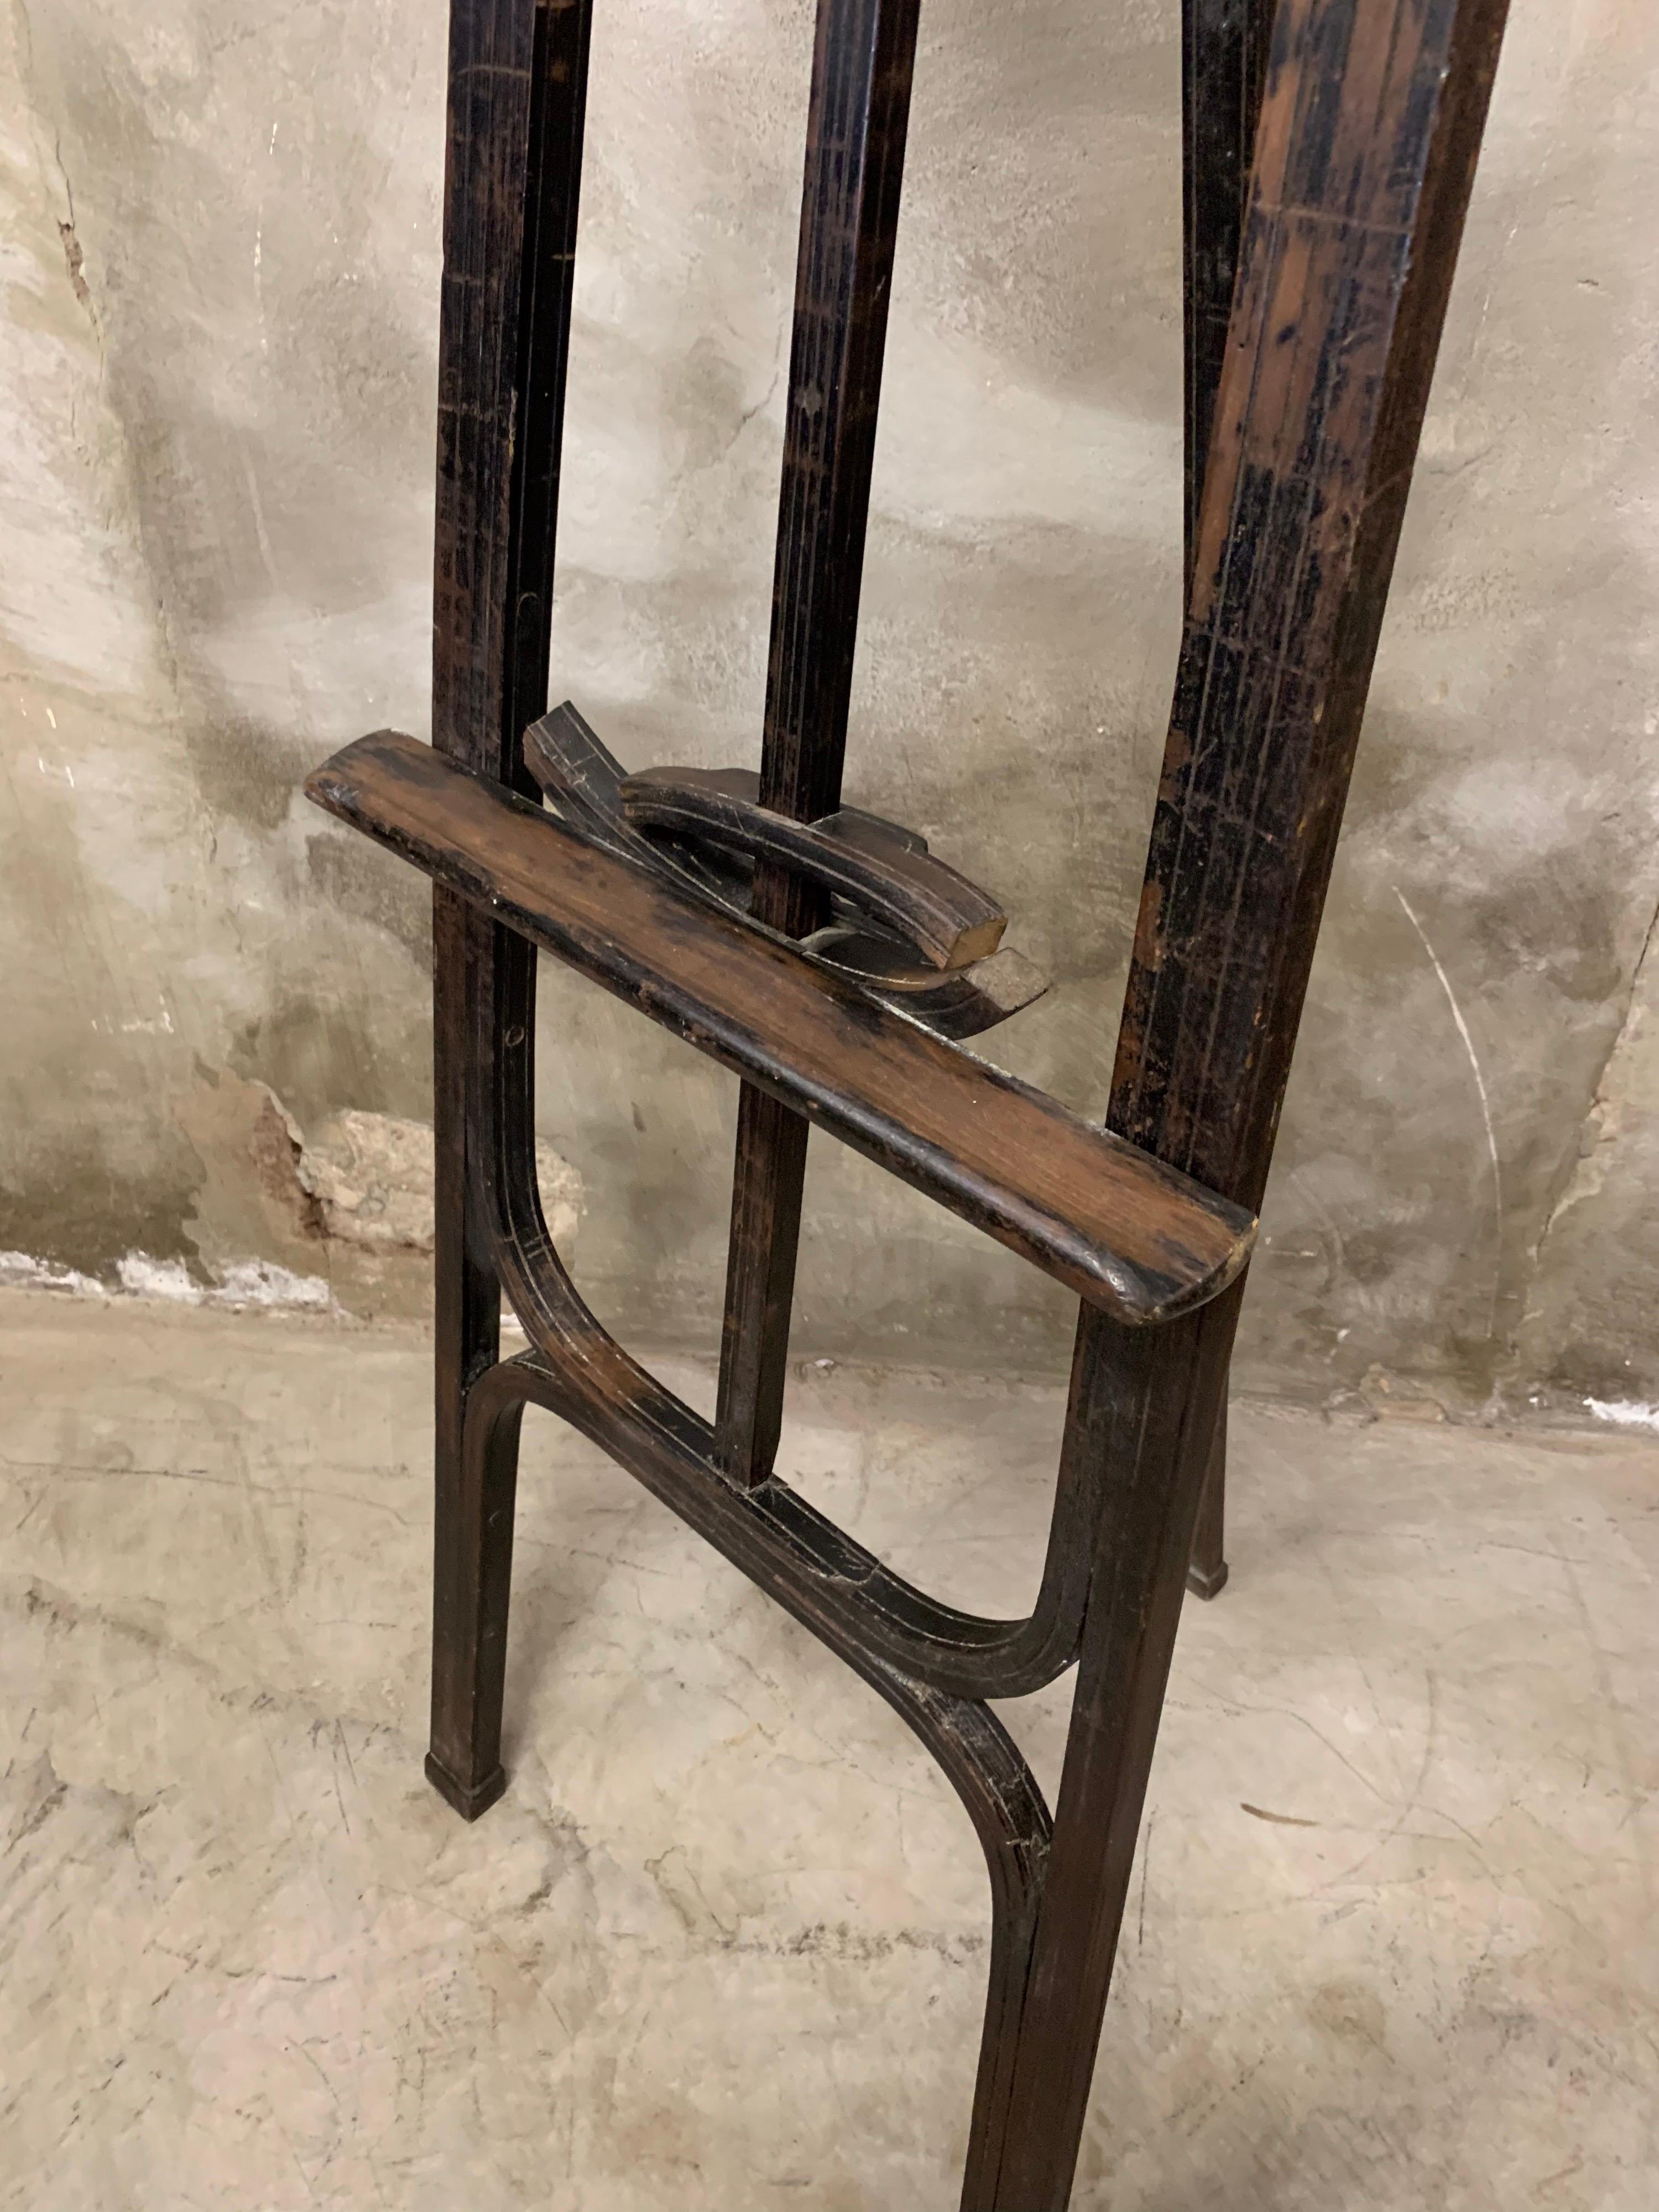 Very special and rare easel, most likely a Thonet, but could also be a Josef Hoffmann or Fischel what makes is all the more special. Curved wood, dates from the 1920s and was made in Vienna. Ideal to use as a standard for a beautiful painting.